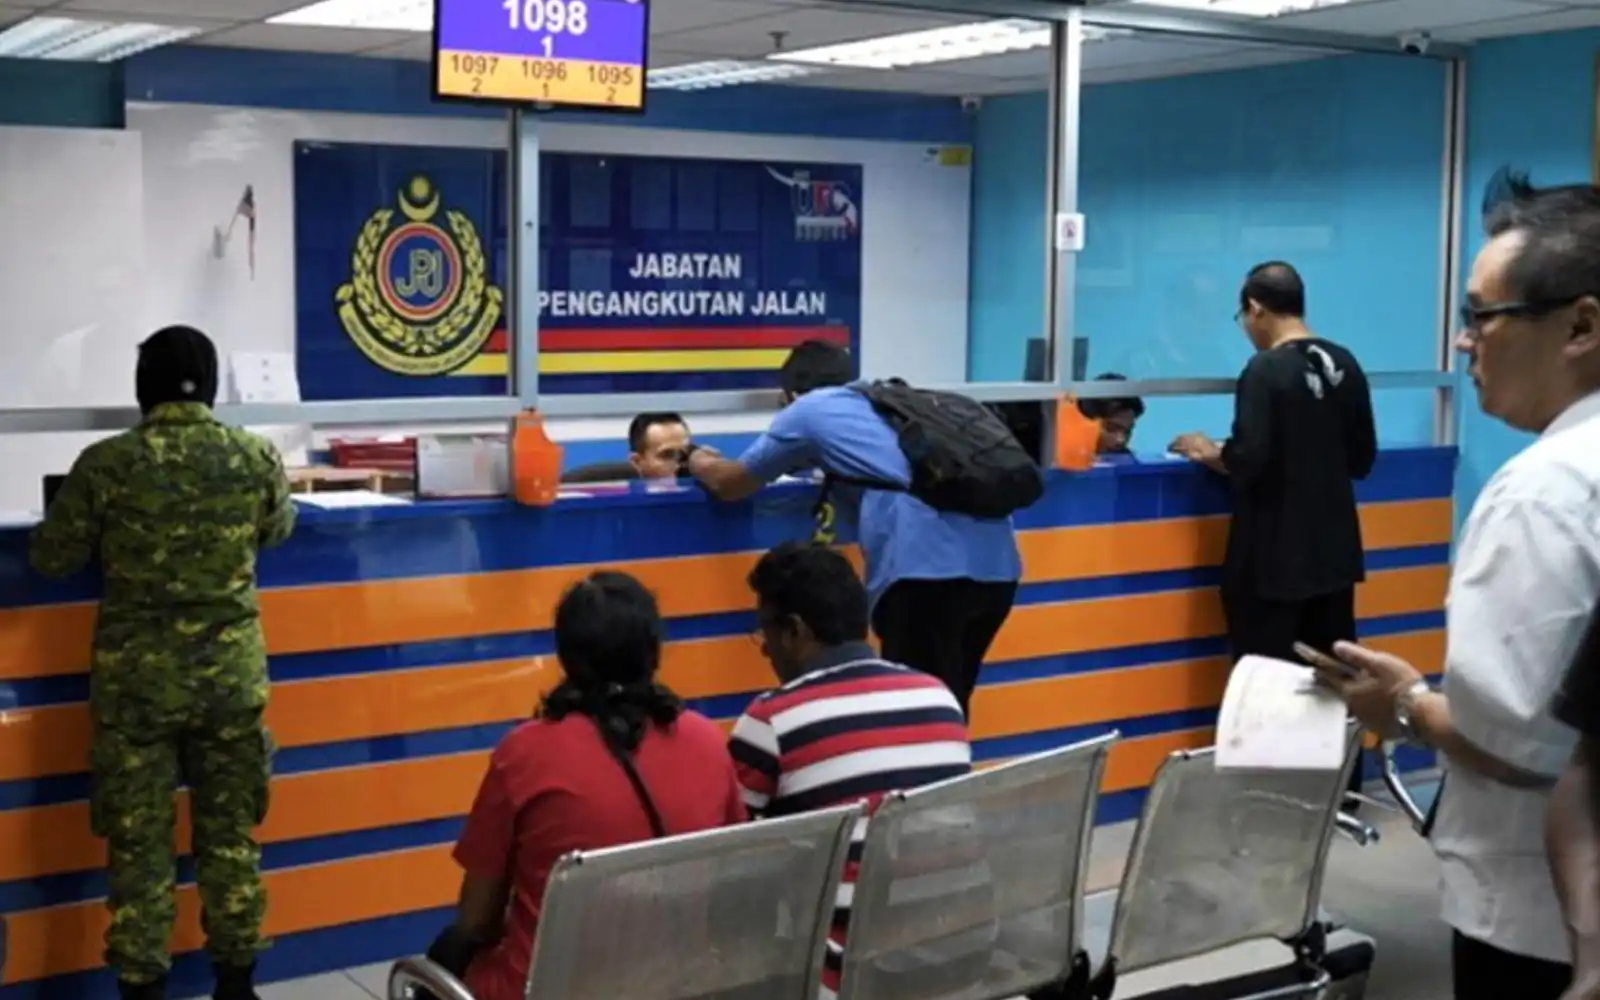 bjak not allowed to offer road tax renewal services, jpj says